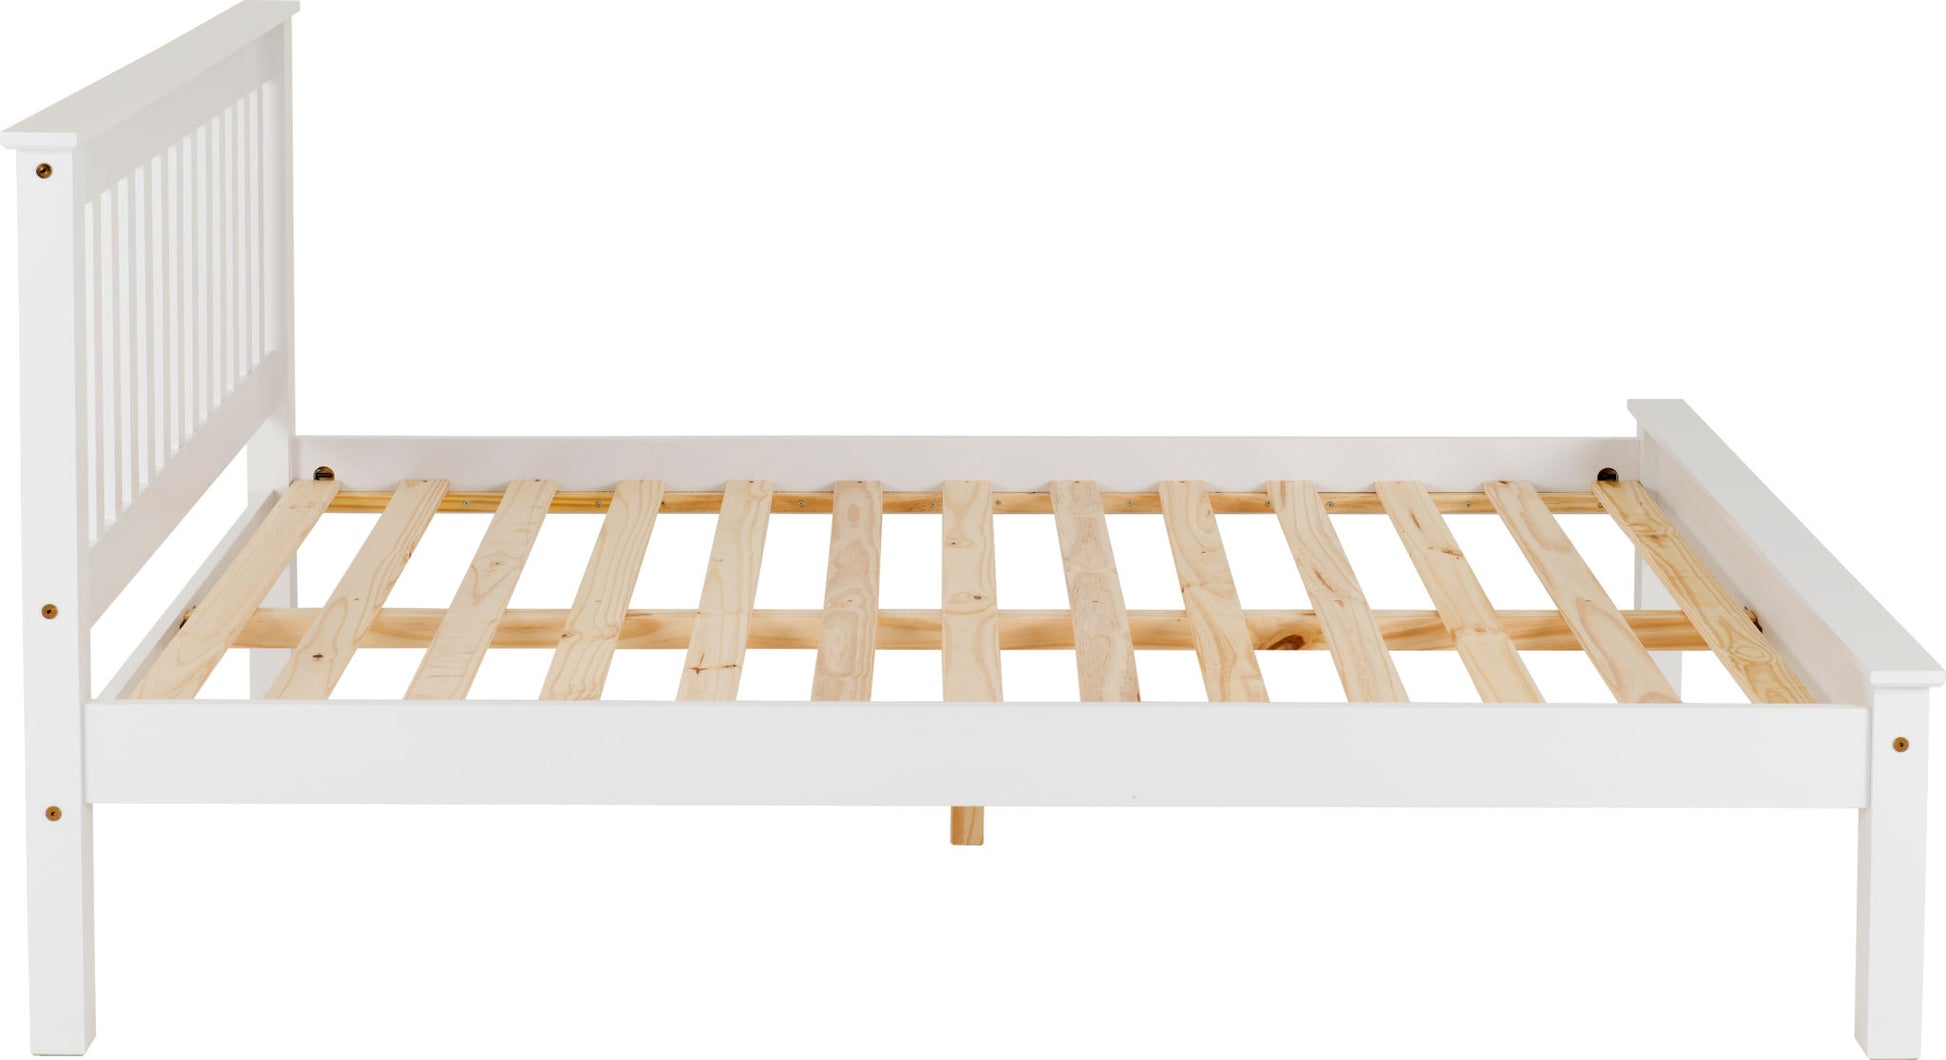 Monaco 4'6" Bed Low Foot End - White